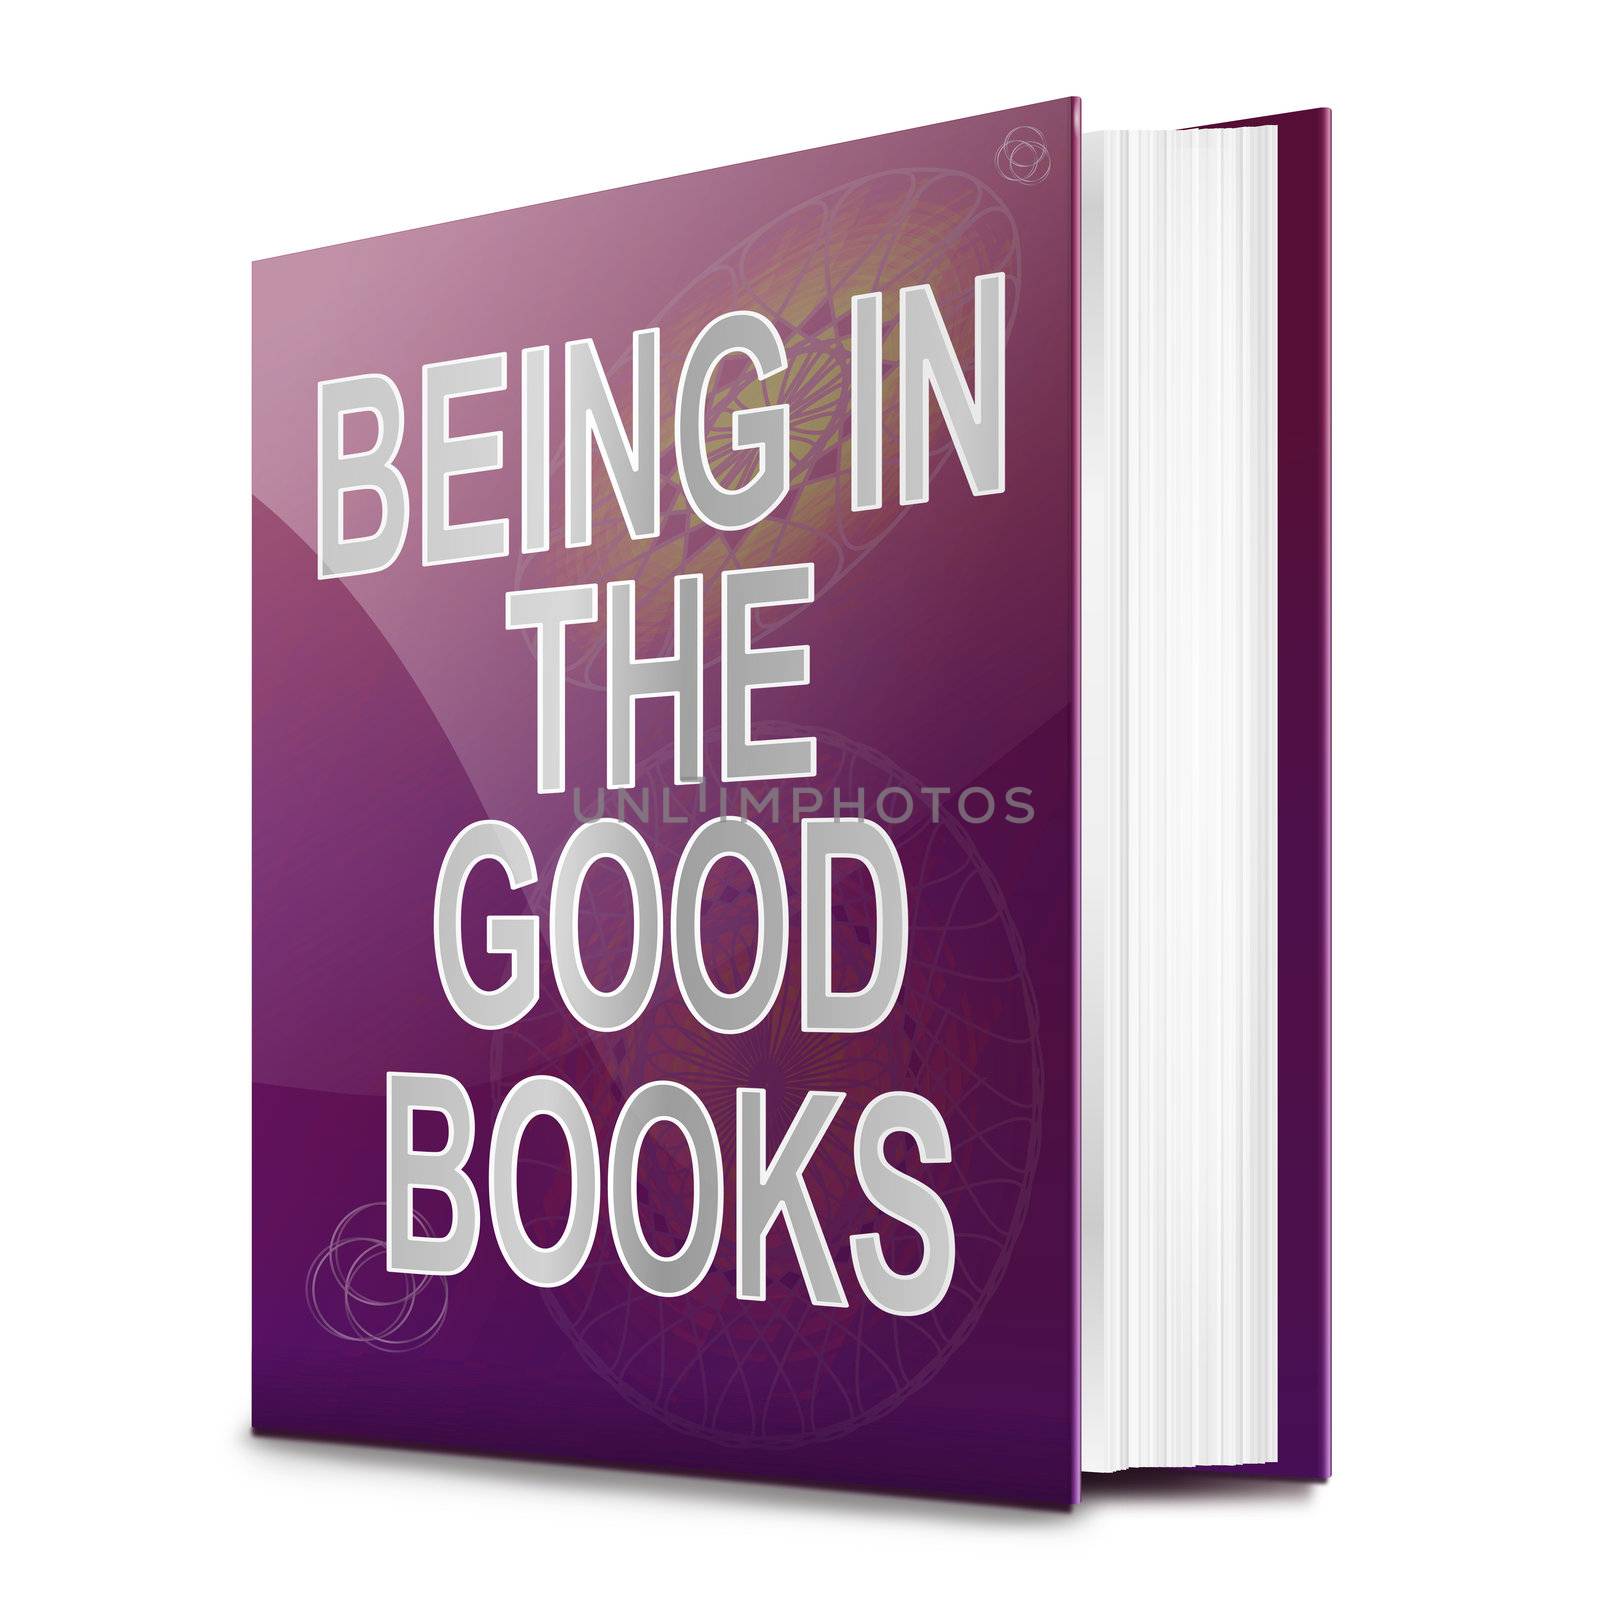 Illustration depicting a text book with a good books concept title. White background.